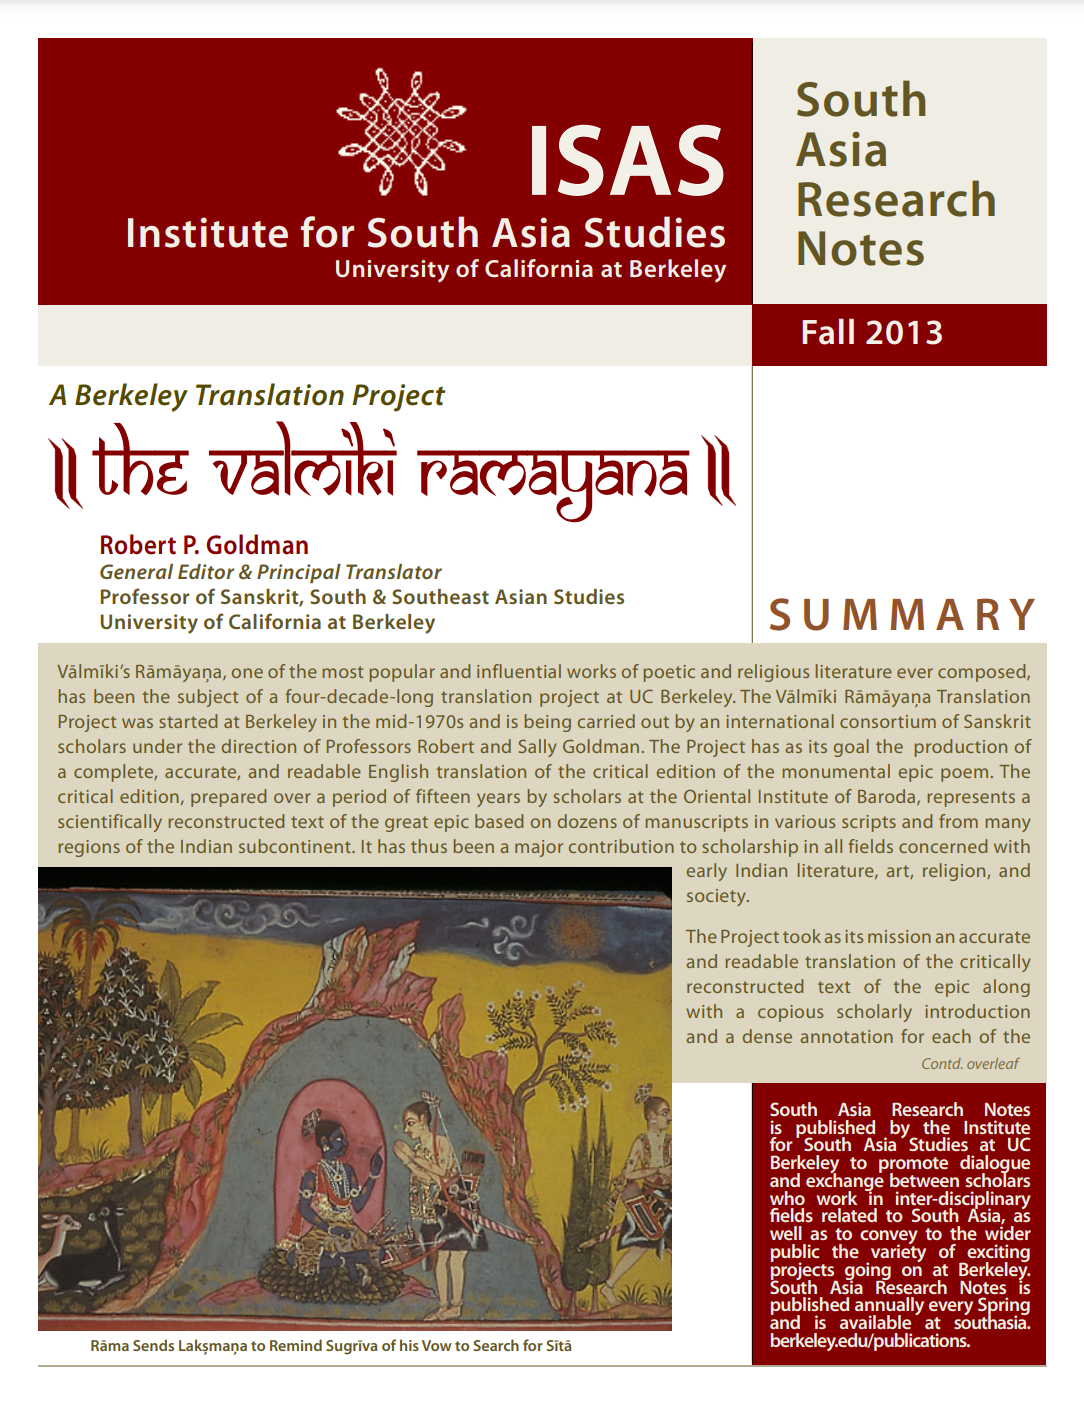 Cover image of SA Research Notes, Fall 2013 by Robert Goldman and Sally Sutherland Goldman